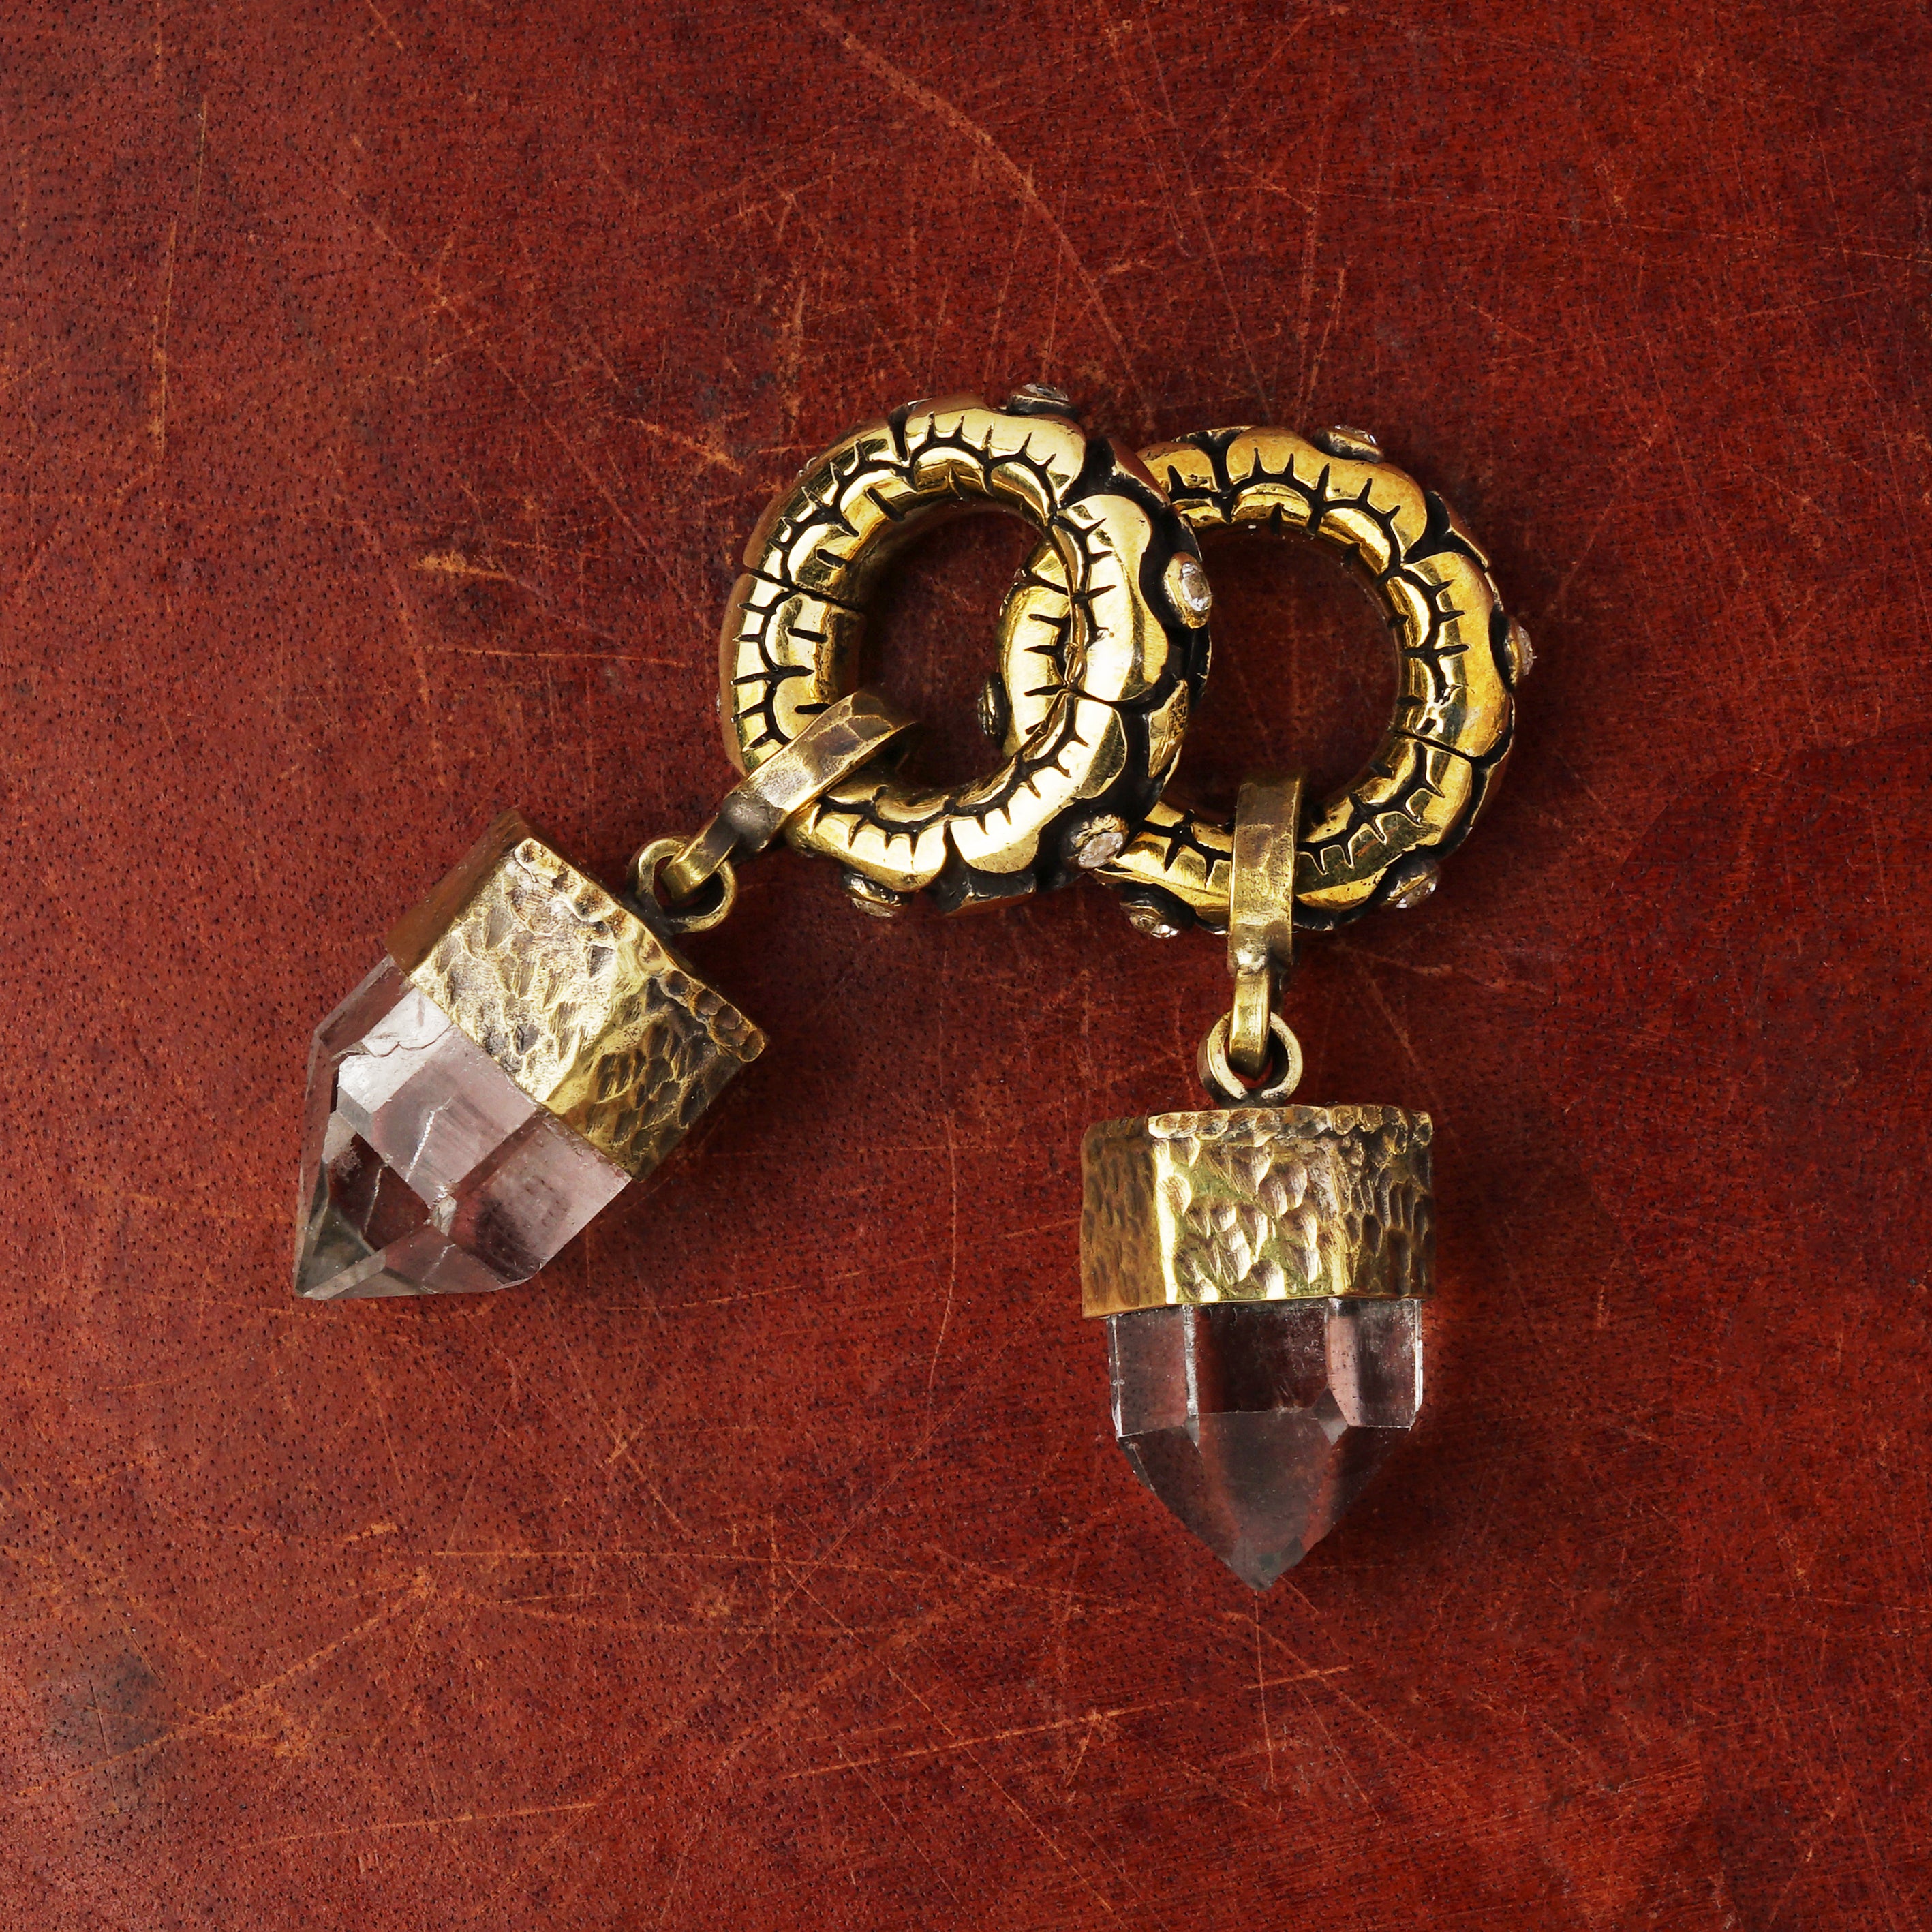 pair of golden flower hoops hangers for stretched ears with topaz stones and quartz pendant